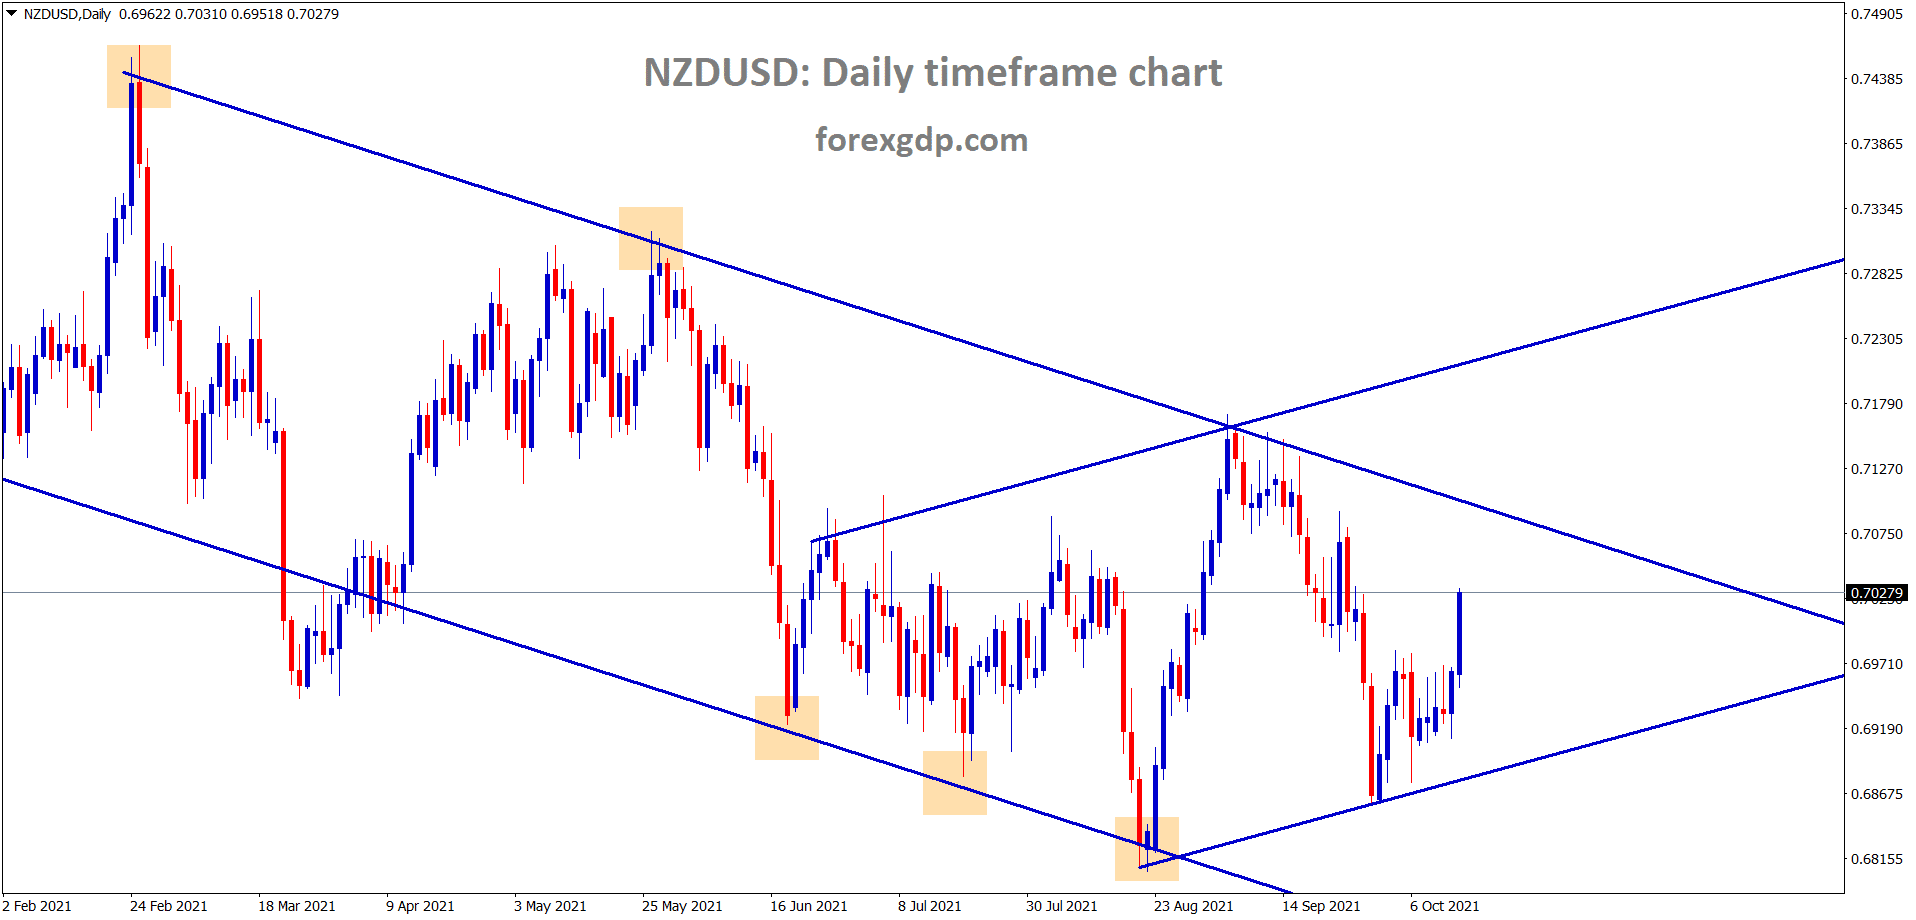 NZDUSD is poping up between the channel levels